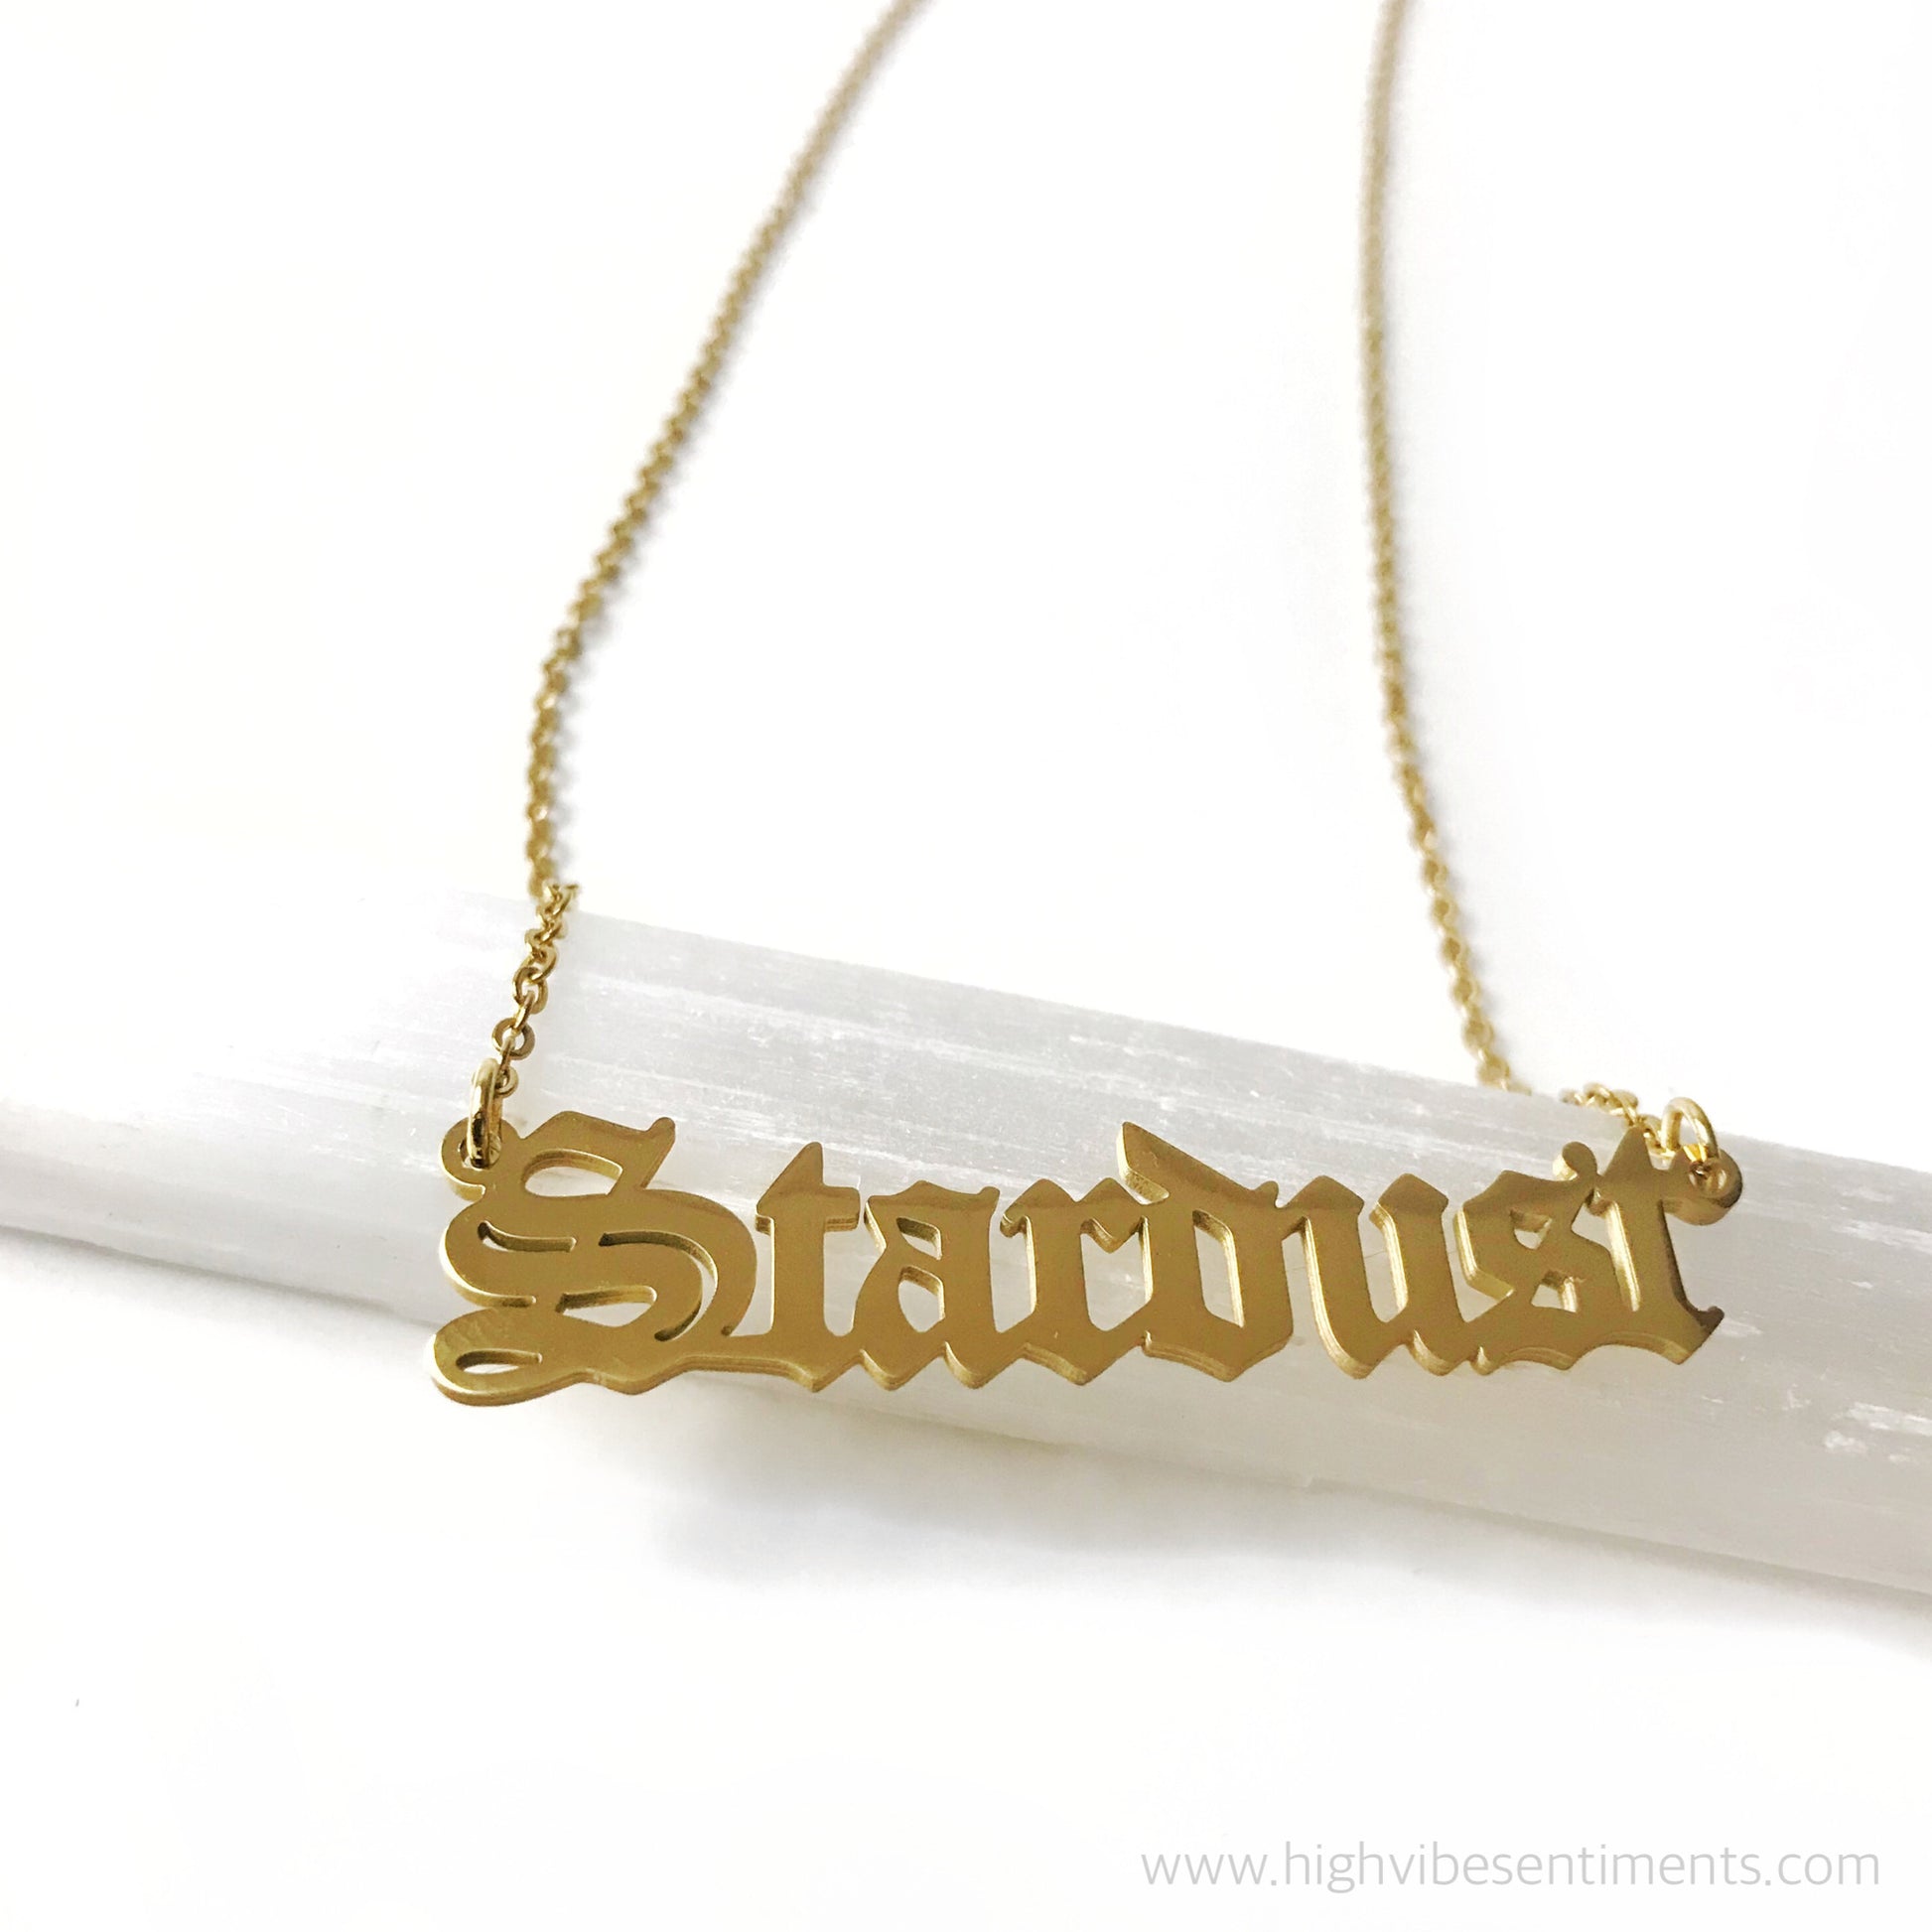 High Vibe Sentiments Stardust Nameplate Necklace